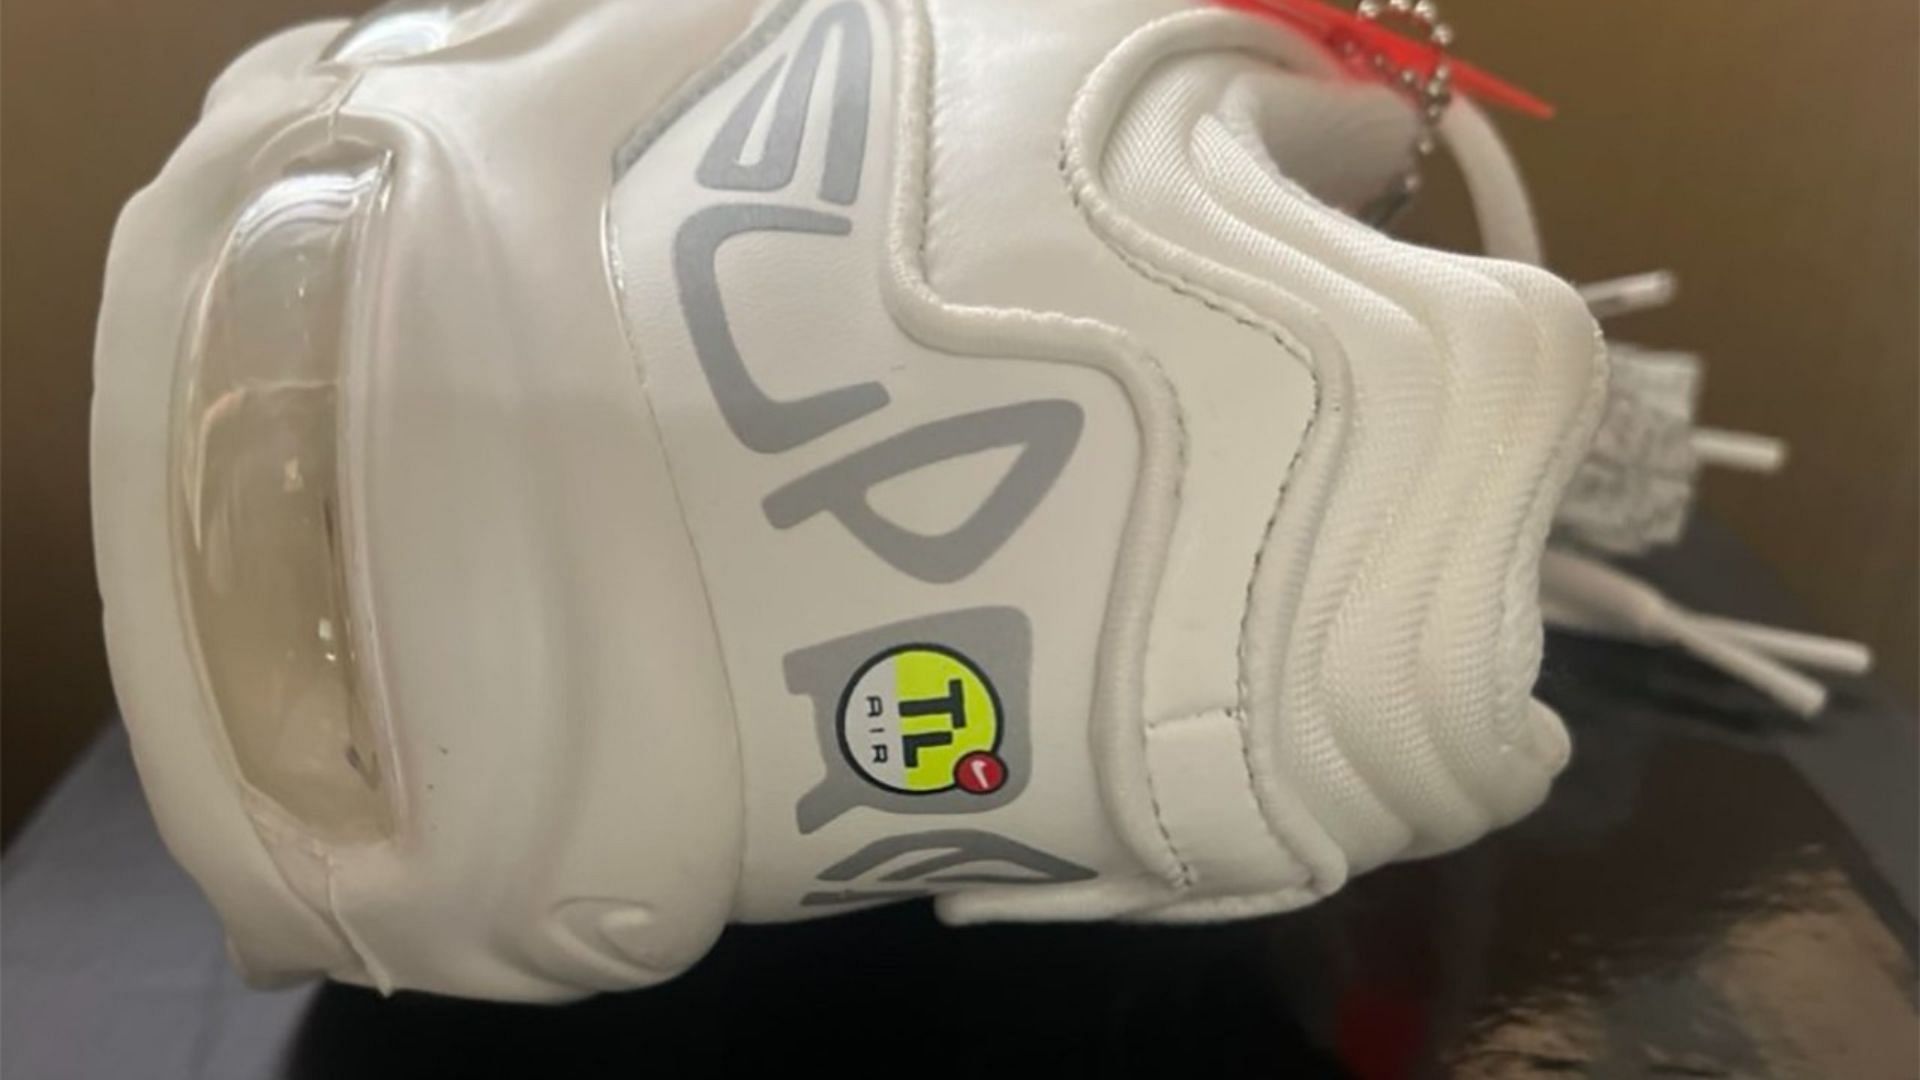 Just do Messed up Tyranny Where to buy Supreme x Nike Air Max 99 TL shoes? Everything we know so far